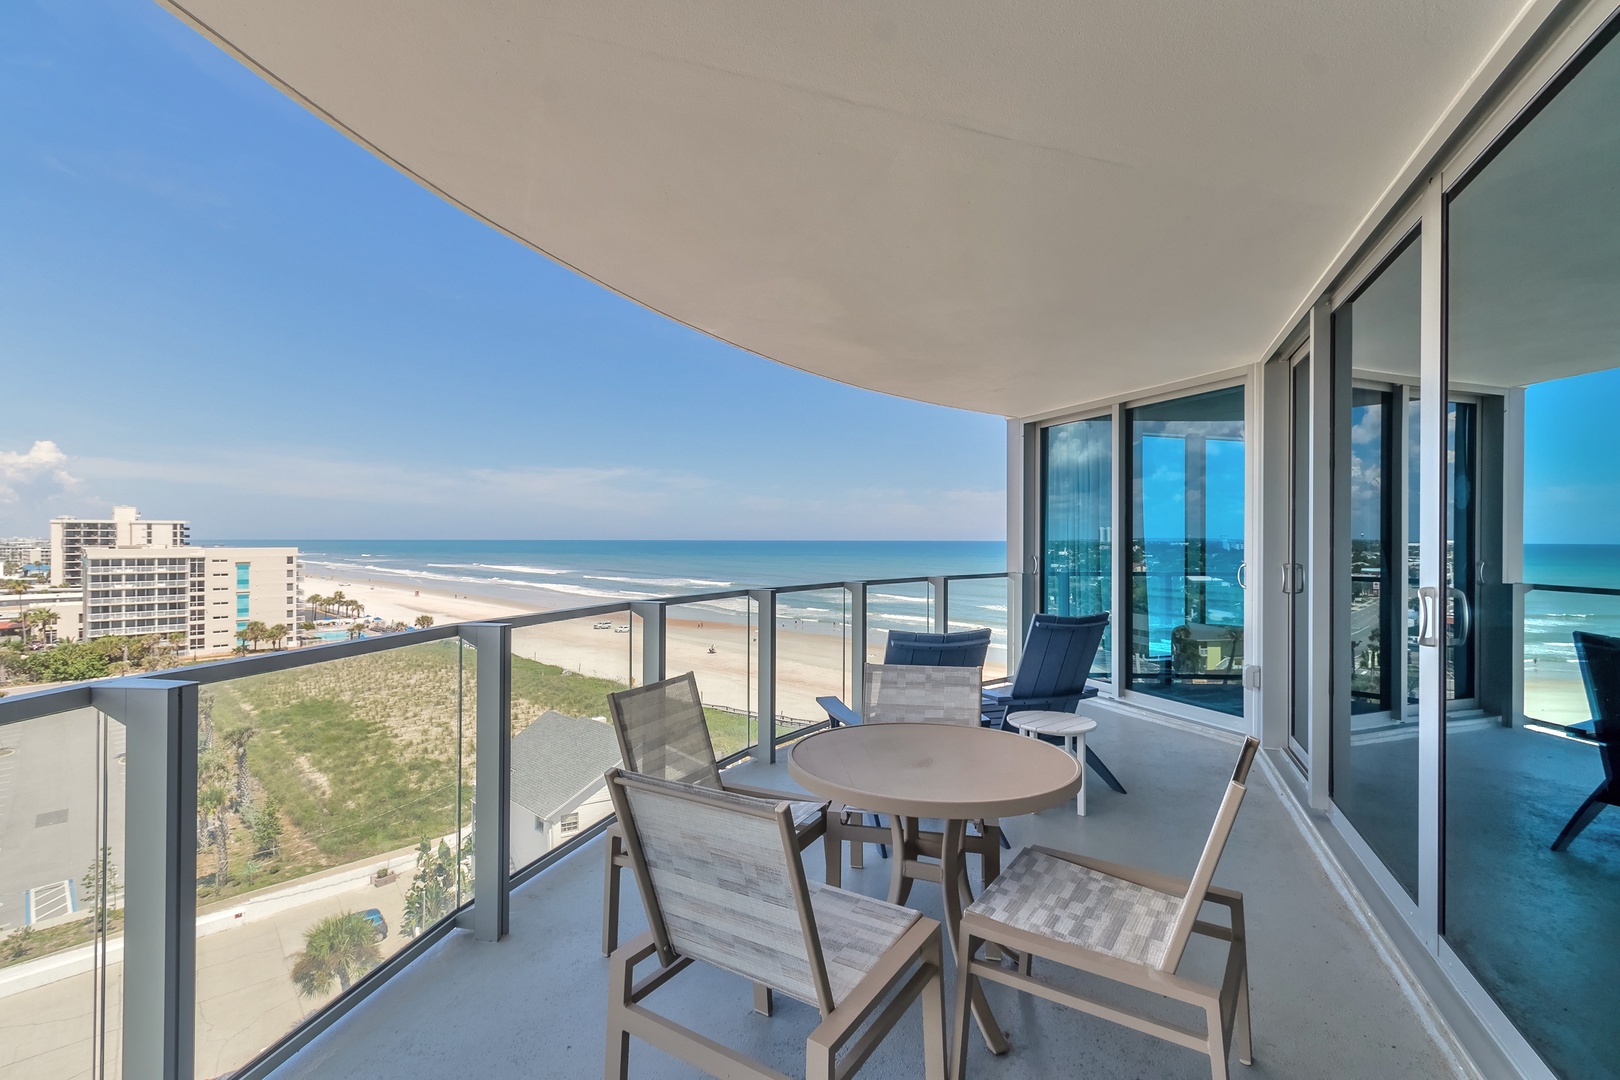 Vistas Beyond Compare: Capture the essence of Daytona Beach's beauty from this captivating balcony.